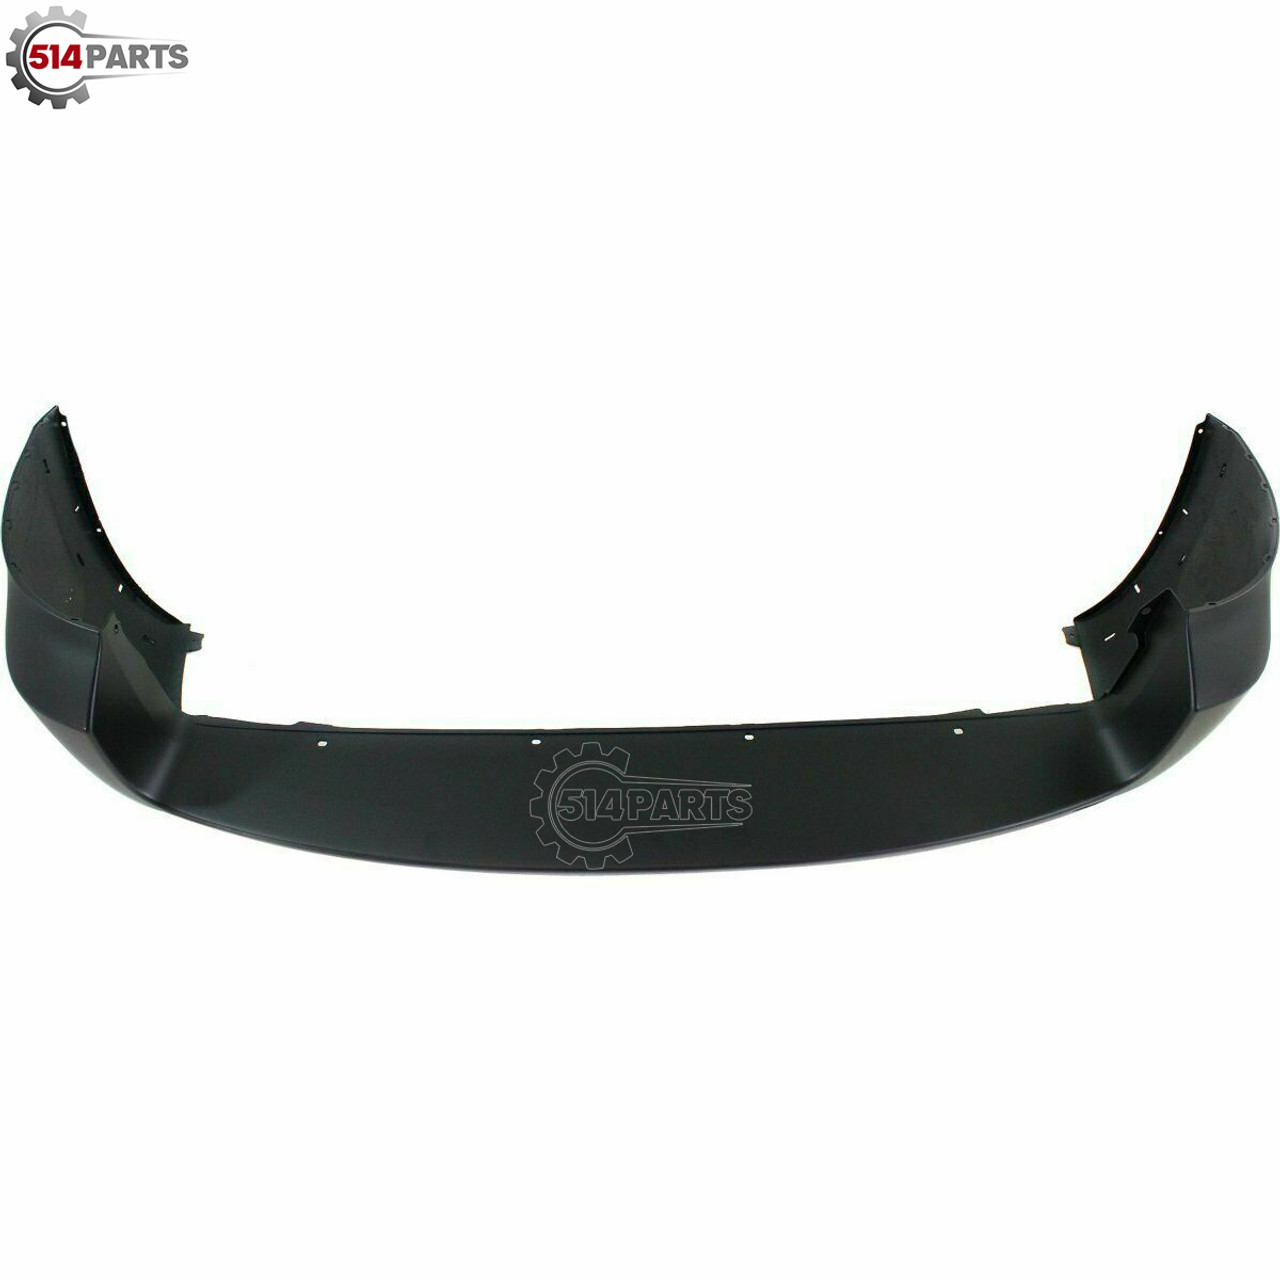 2006 - 2012 TOYOTA RAV4 SPORT AND LIMITED MODELS with FLARE HOLE PRIMED REAR BUMPER COVER without RR GATE MOUNTED SPARE TIRE - PARE-CHOC ARRIER PRIME